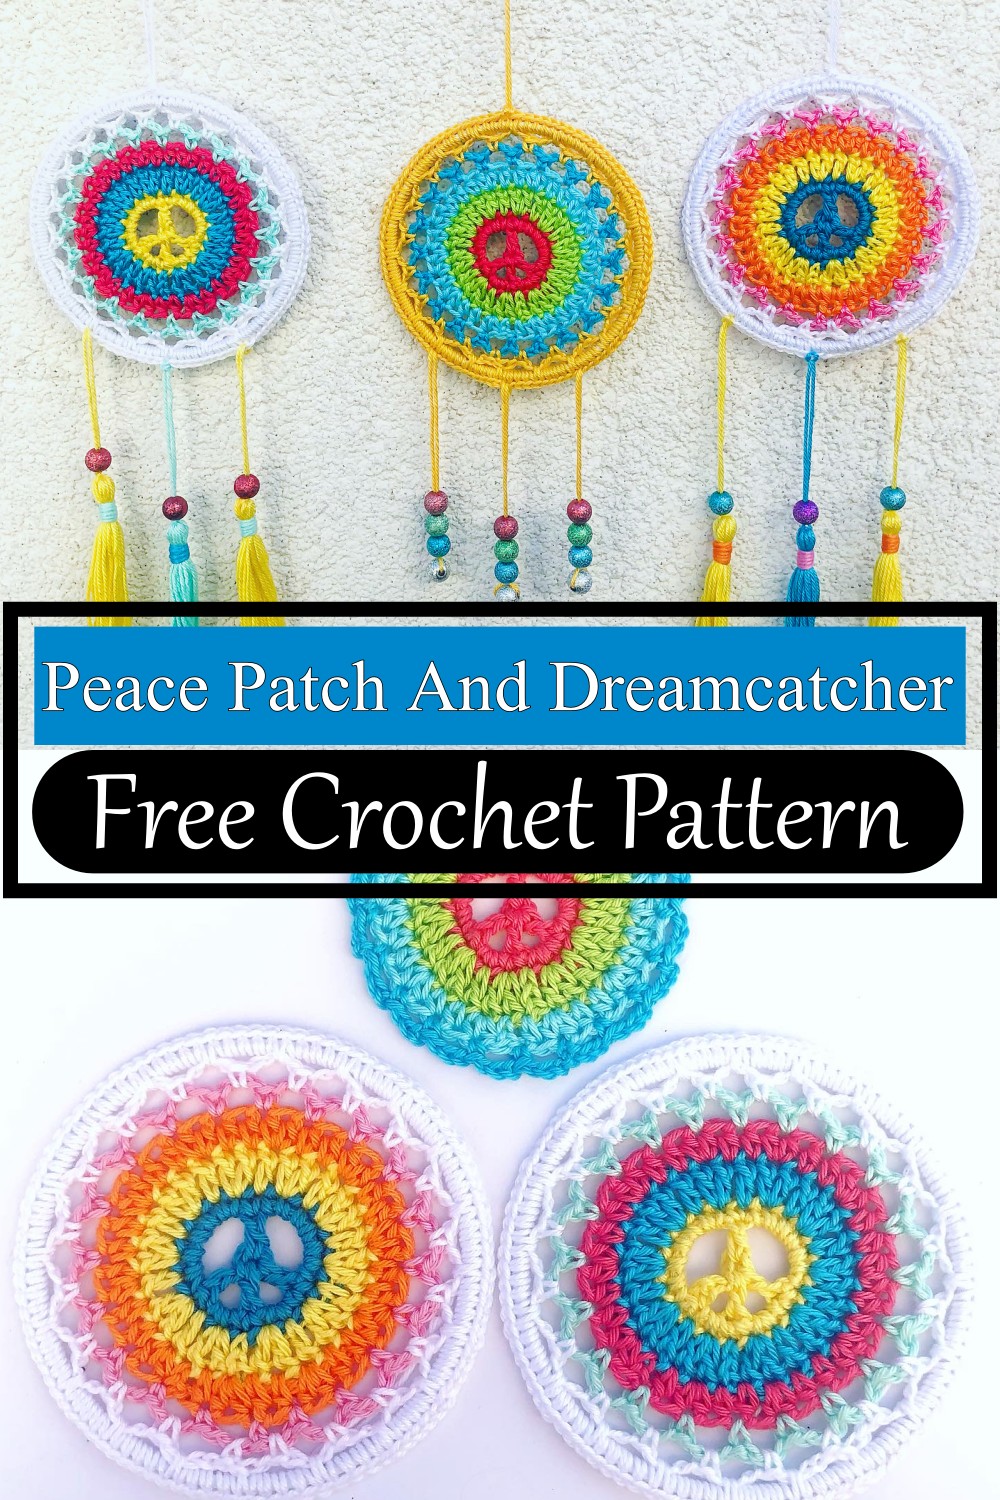 Peace Patch And Dreamcatcher